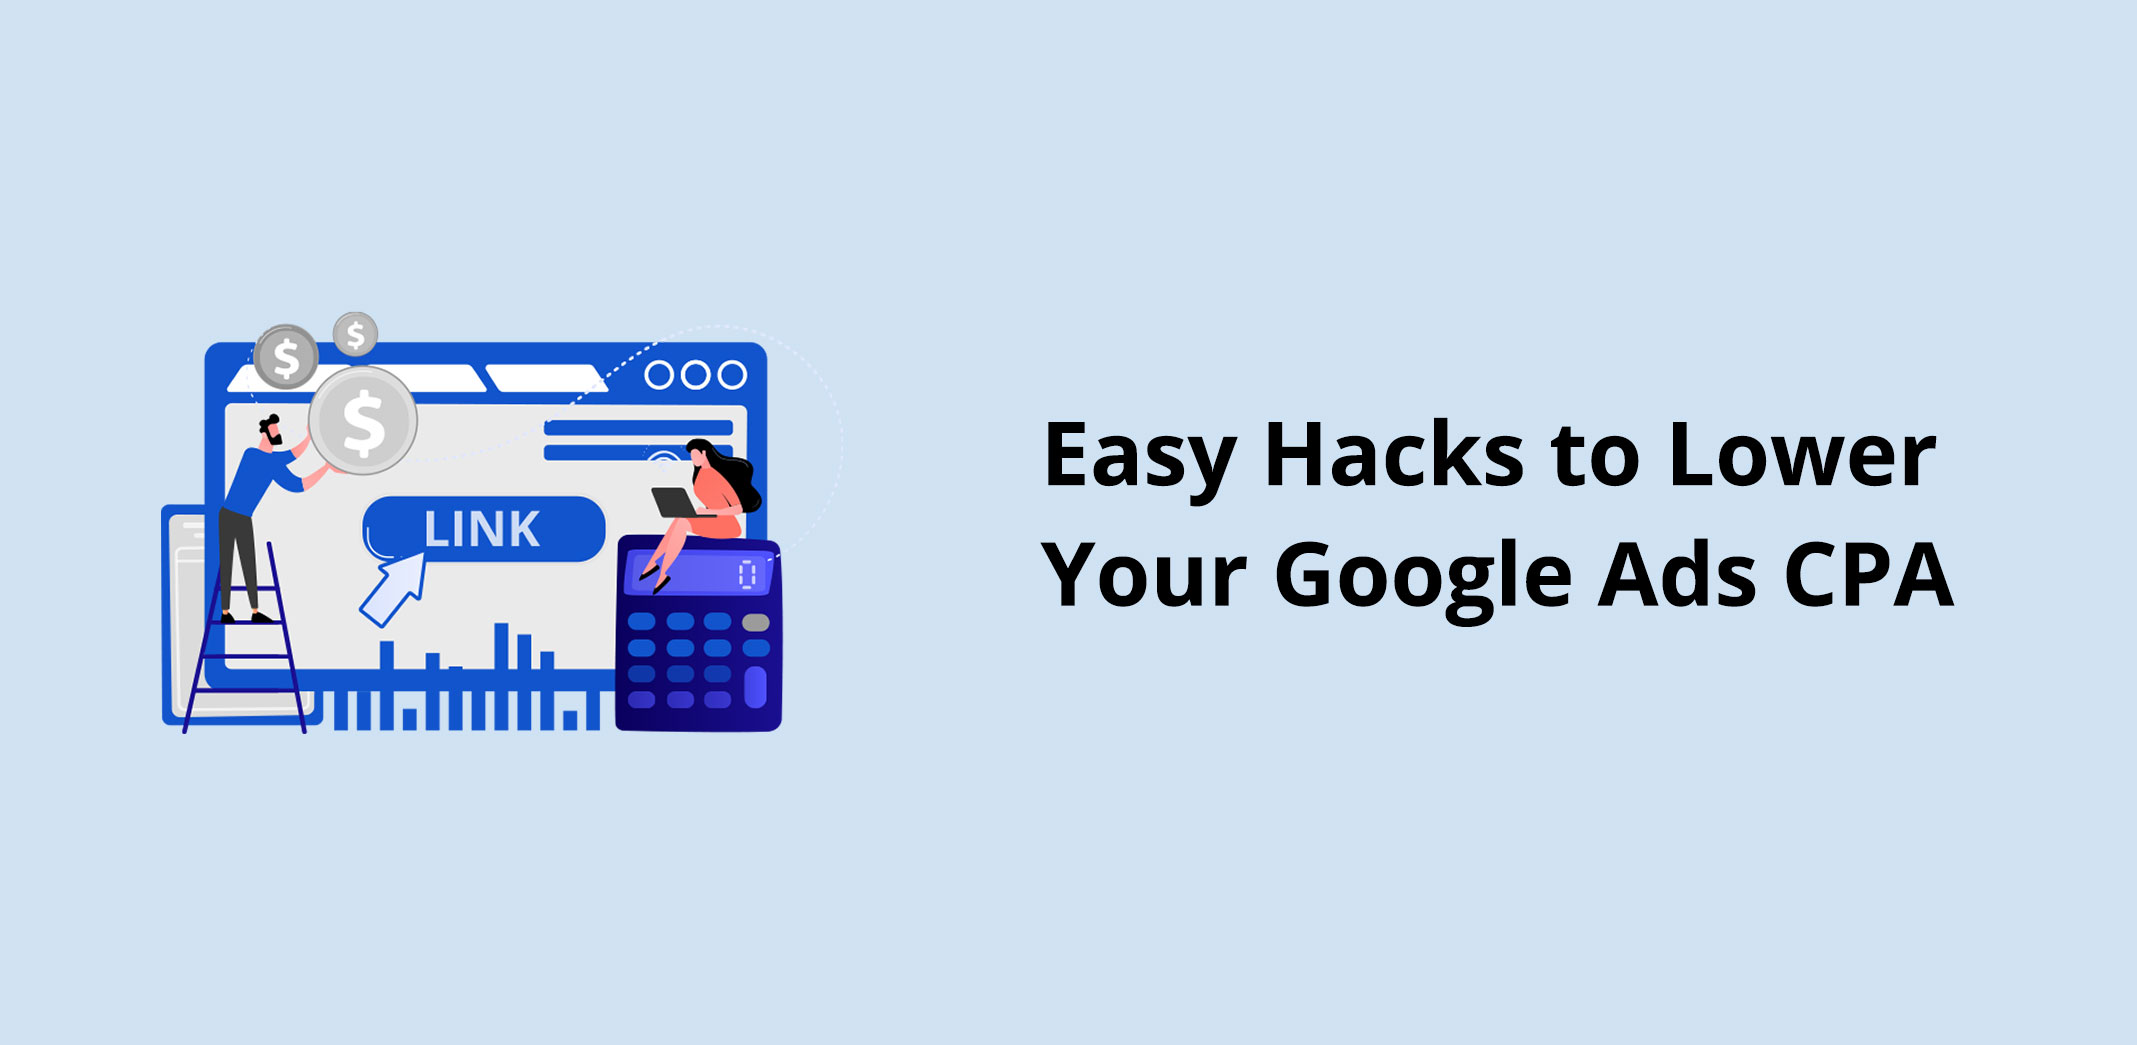 Easy Hacks to Lower Your Google Ads CPA